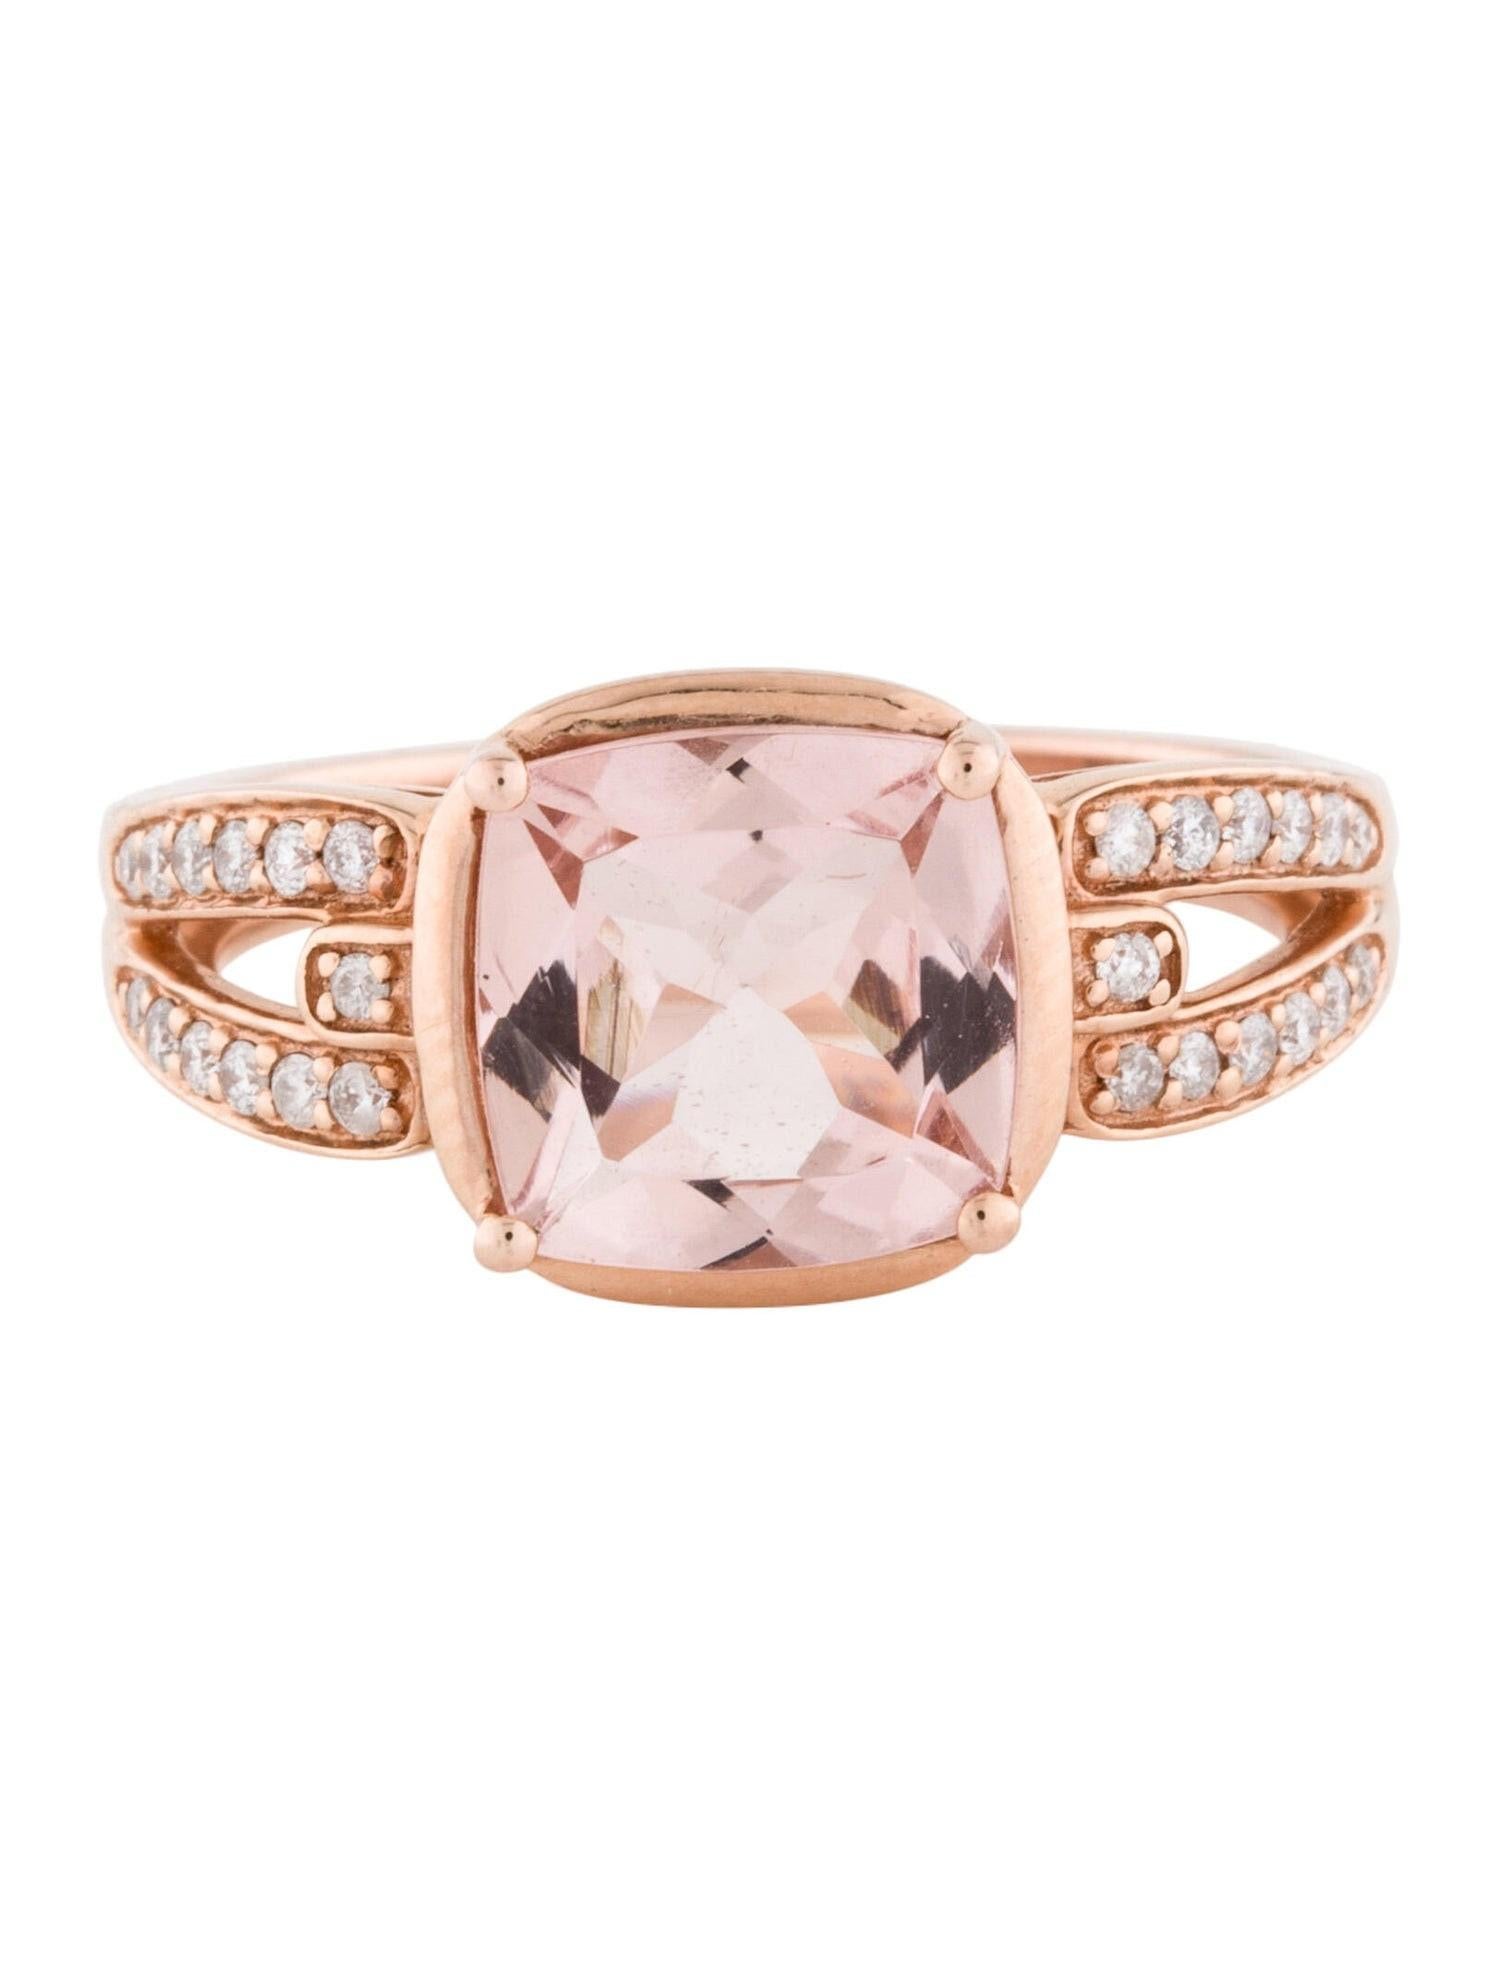 This is a gorgeous natural morganite and diamond ring set in solid 14k rose gold. The natural 9MM cushion cut 3.12carat morganite (AAA quality gem) has an excellent peachy pink color and is surrounded by a halo of round-cut white diamonds. The ring